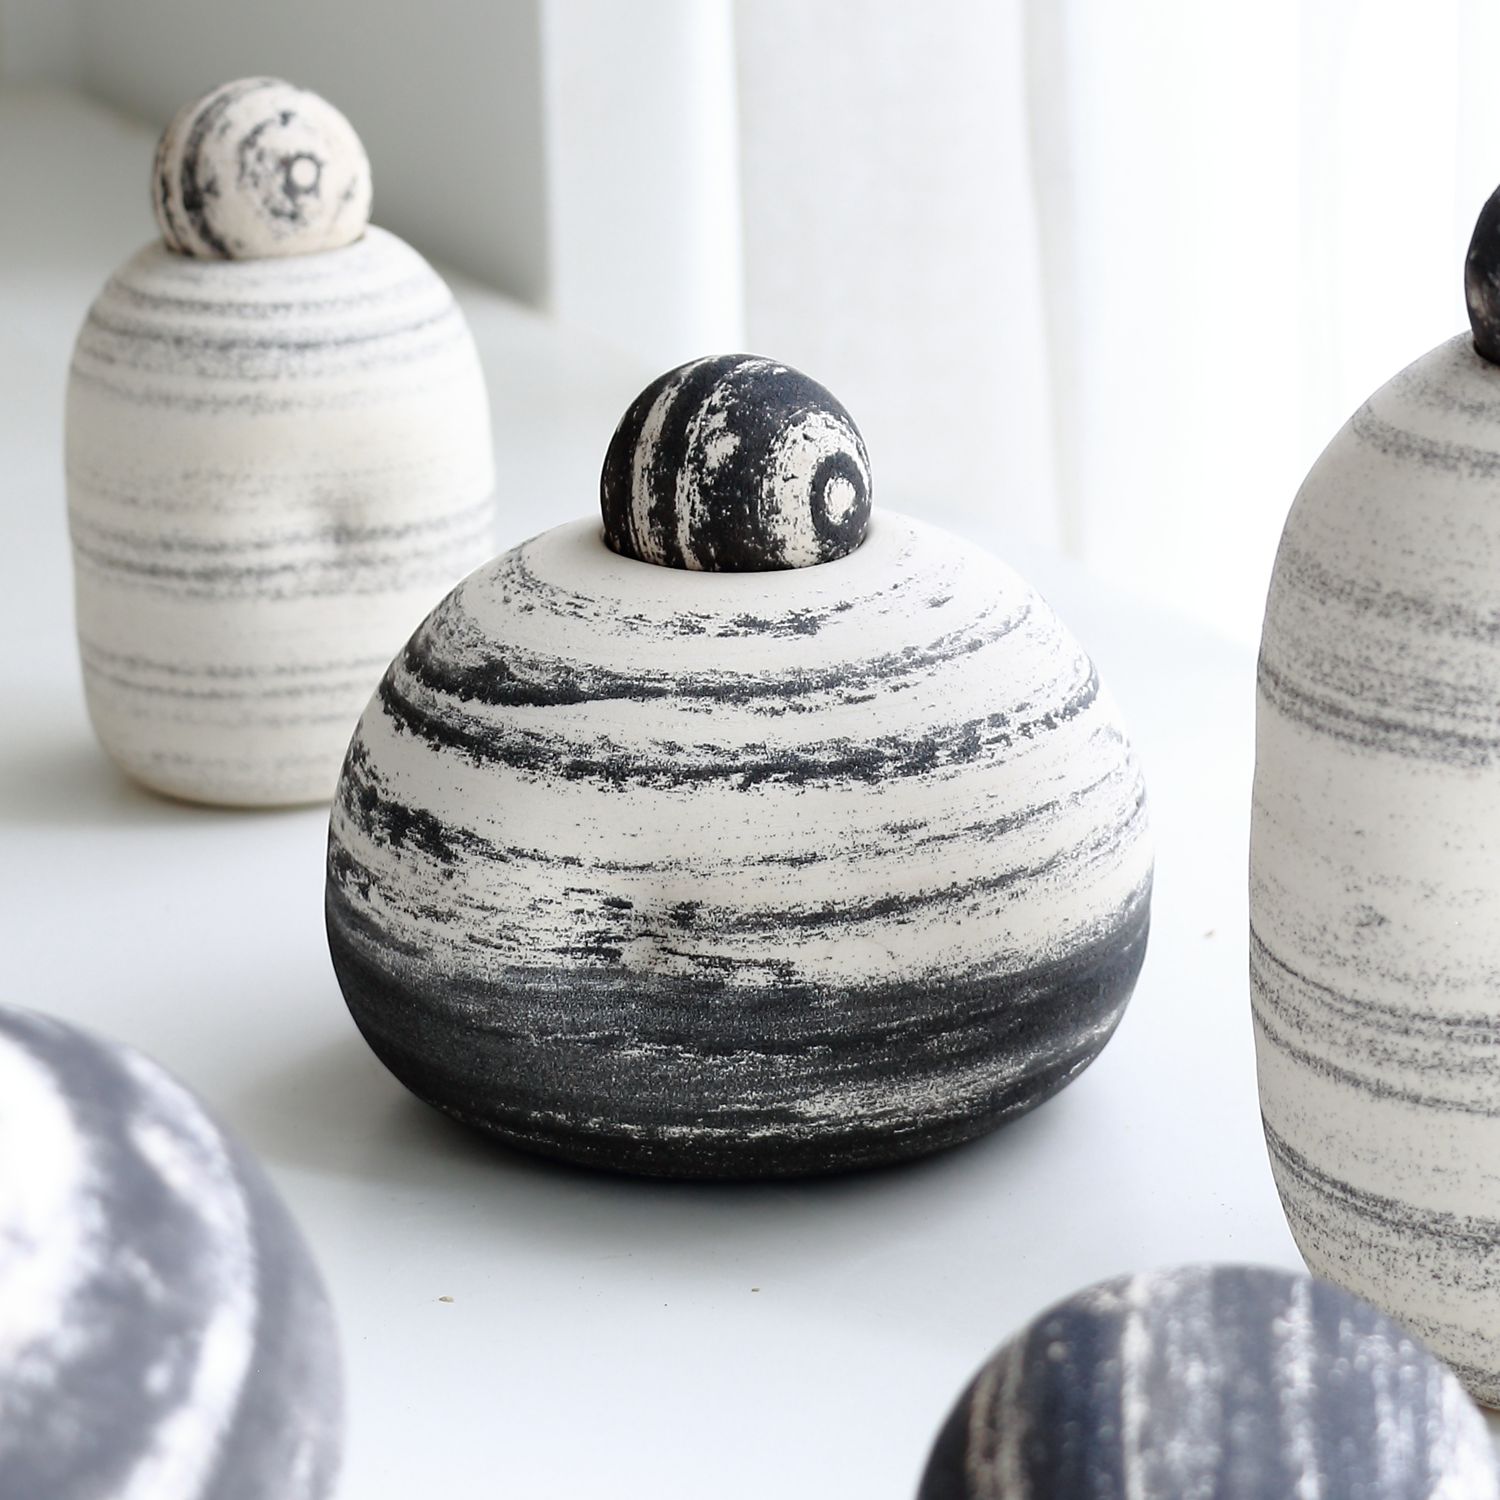 Celina Kang: Round Vase with Pebble Ball Stopper Product Image 1 of 2